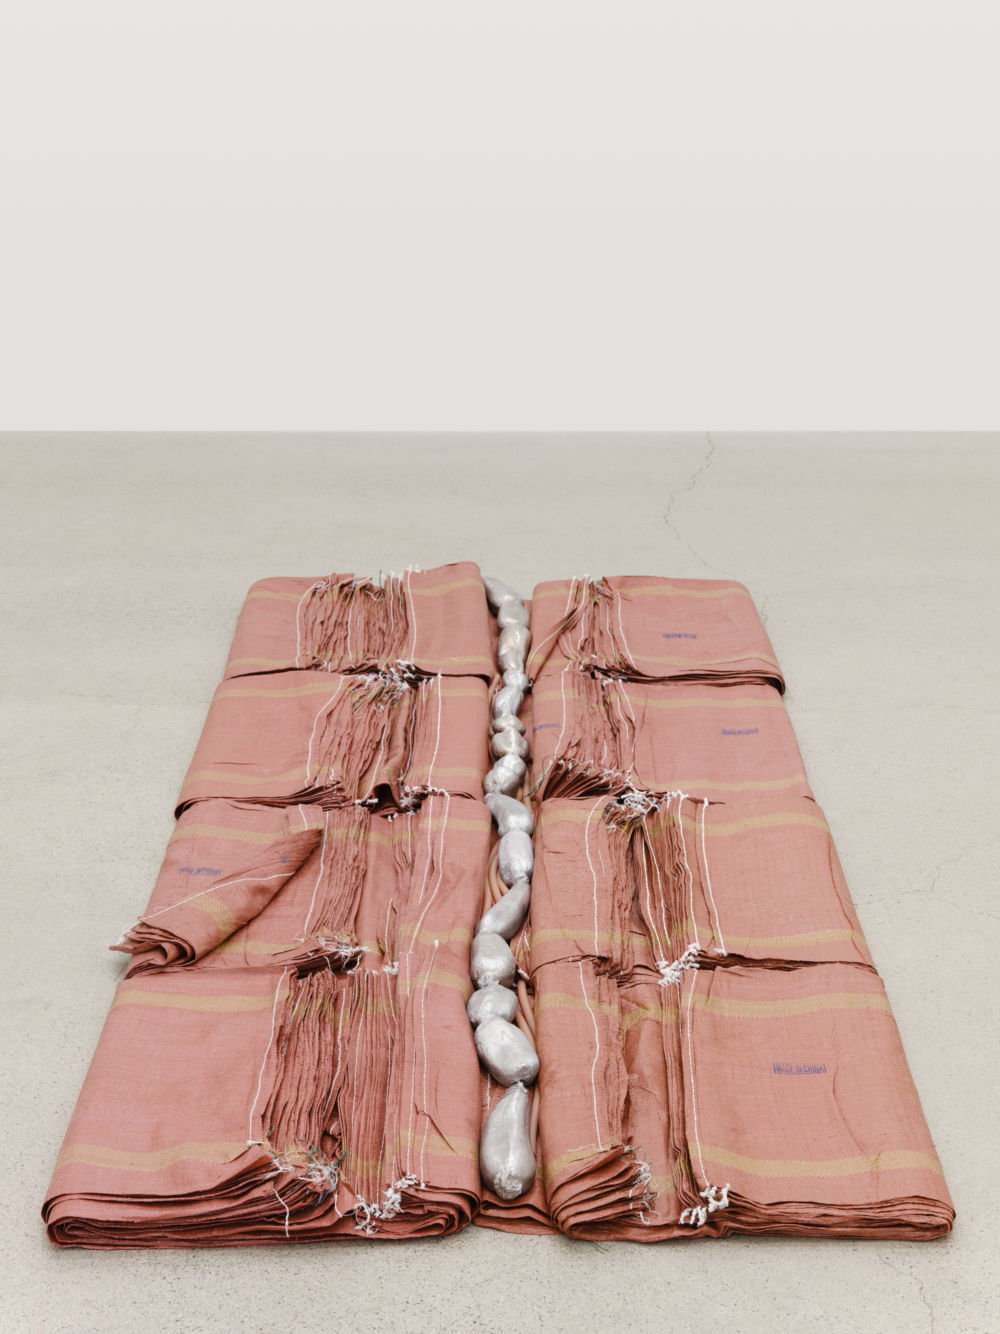 Laurie Kang,  Scaffold, 2022, construction bags, cast aluminum lotus root, pigmented silicone, 4 1/2 x 46 x 111 in. (11 x 117 x 282 cm) by 